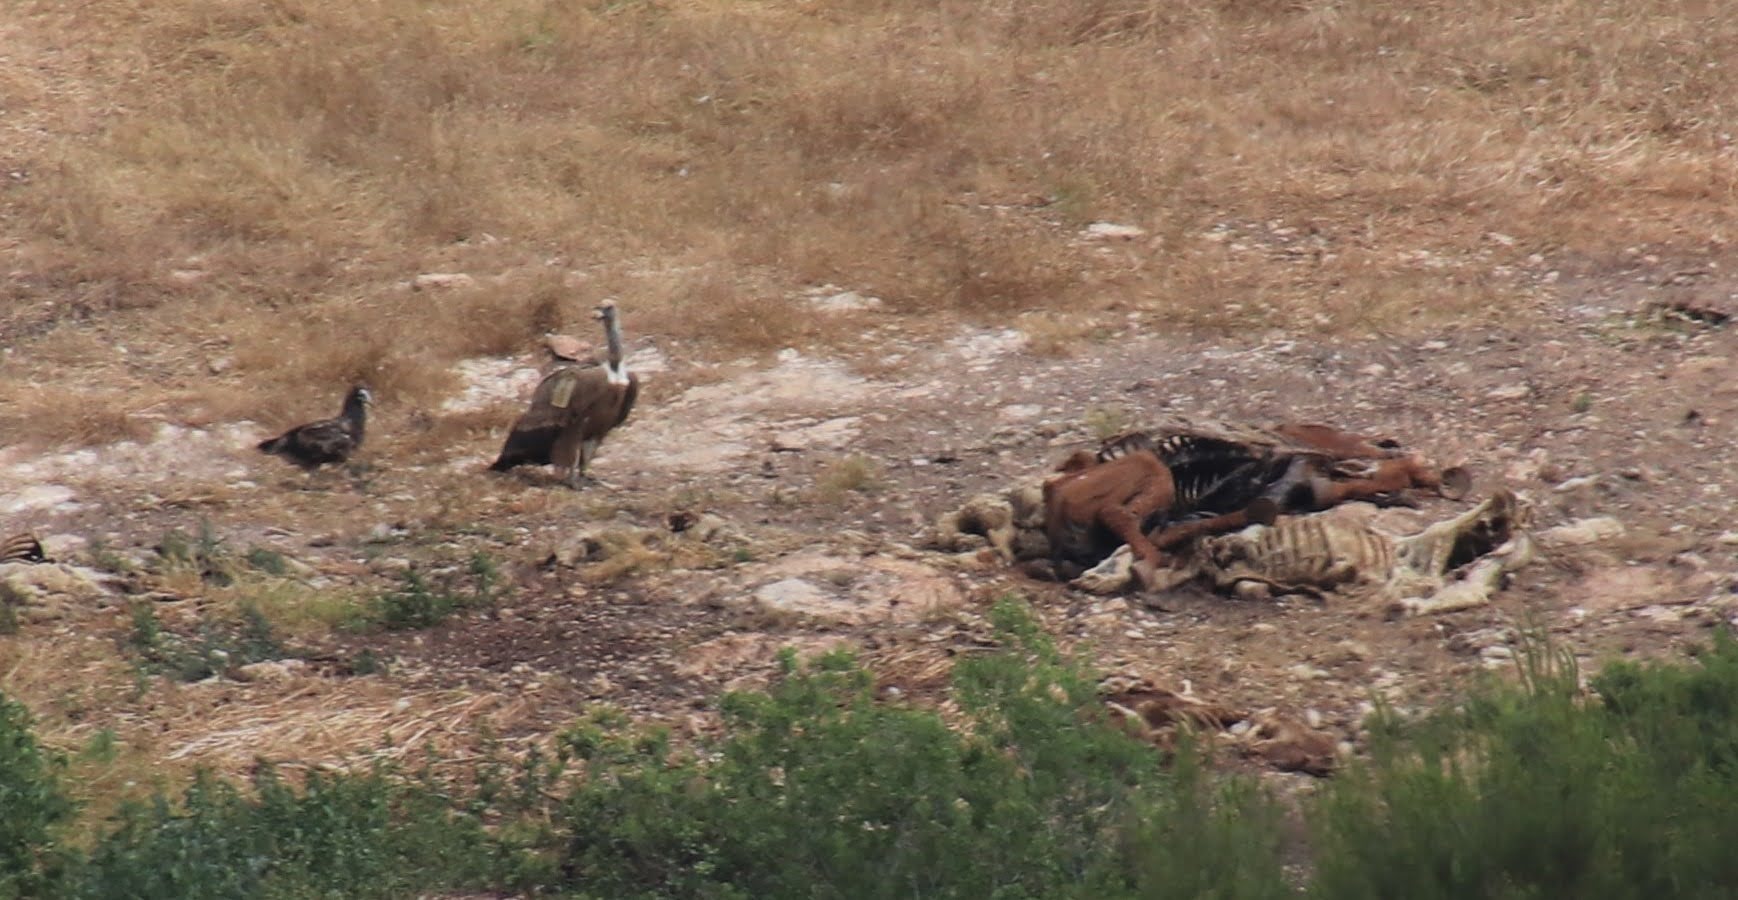 A Eurasian Griffon Vulture (Gyps fulvus) and an Egyptian Vulture (Neophron percnopterus) feed at a carcass provided at a feeding site in Israel. Photo by Noa Pinter-Wollman.